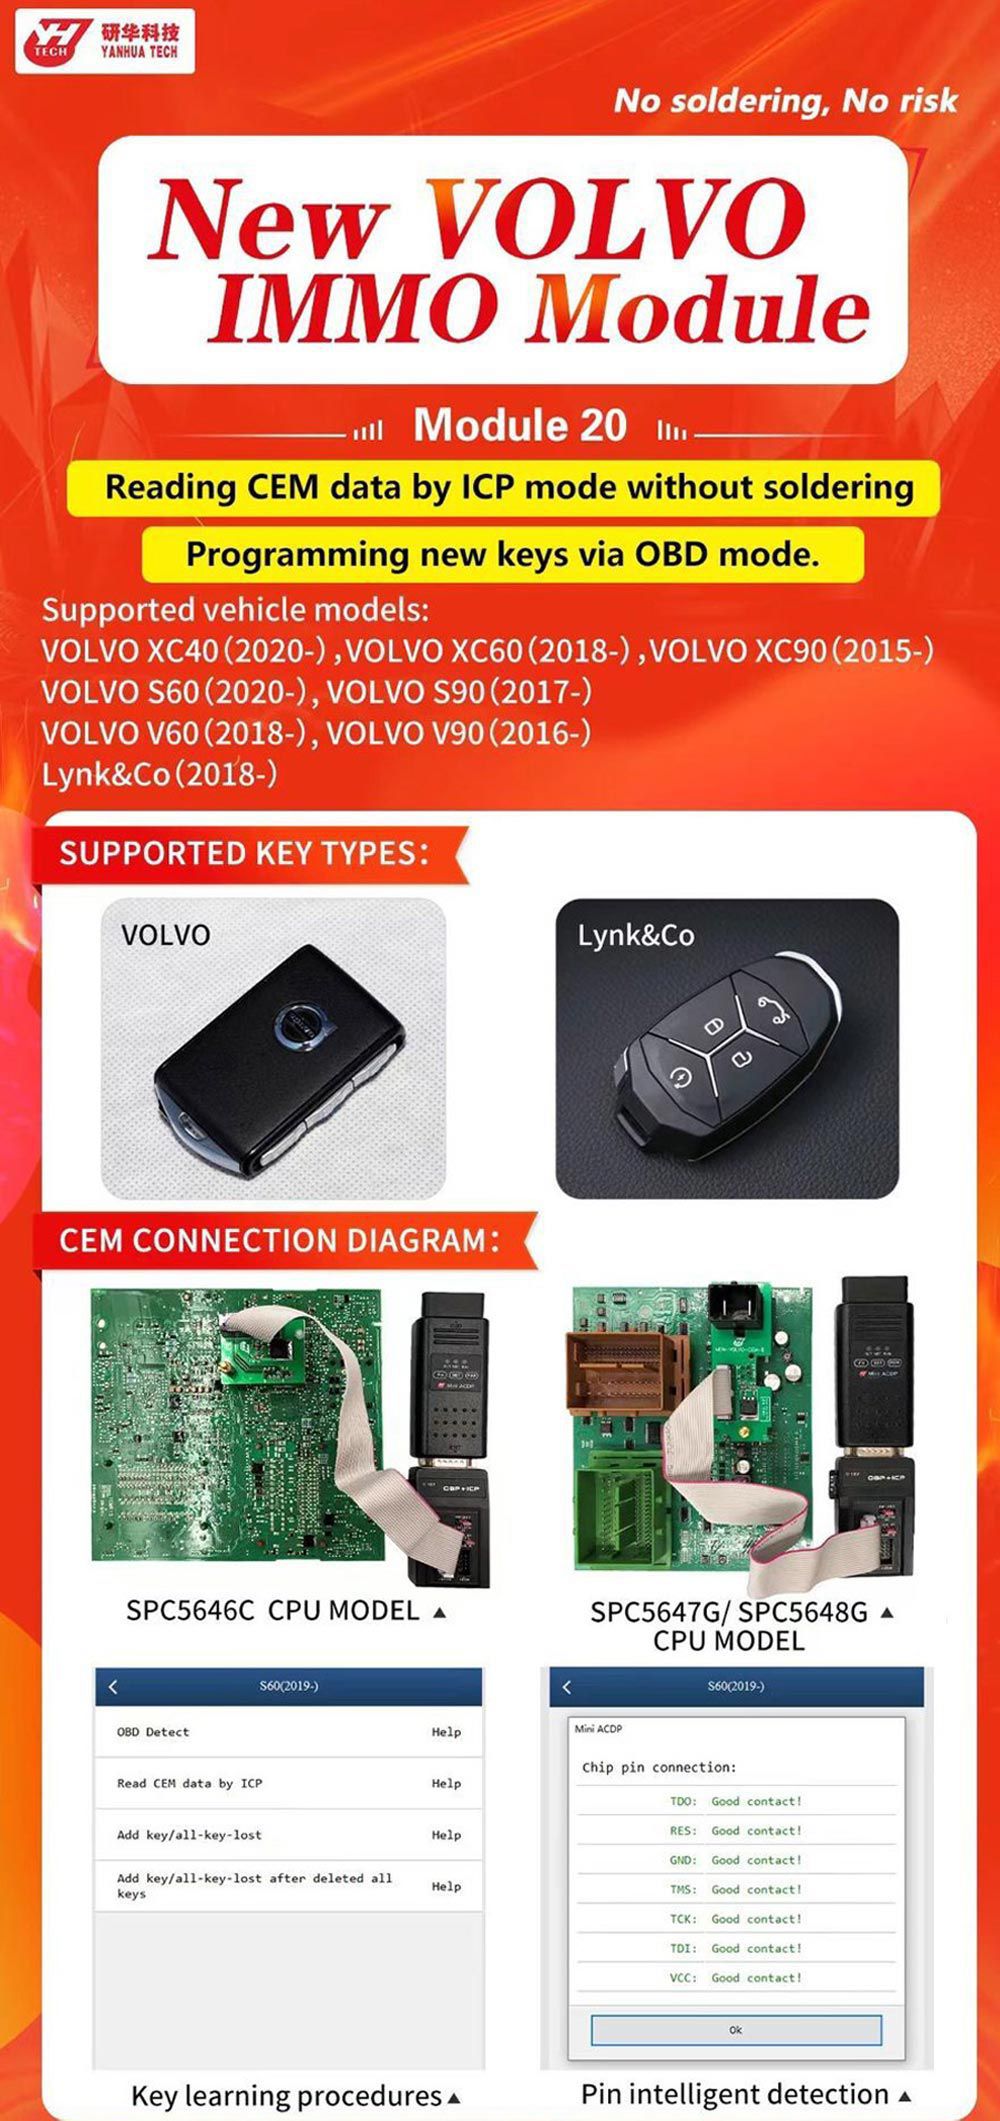 Yanhua ACDP nouveau Volvo immo module 20 avec licence a302